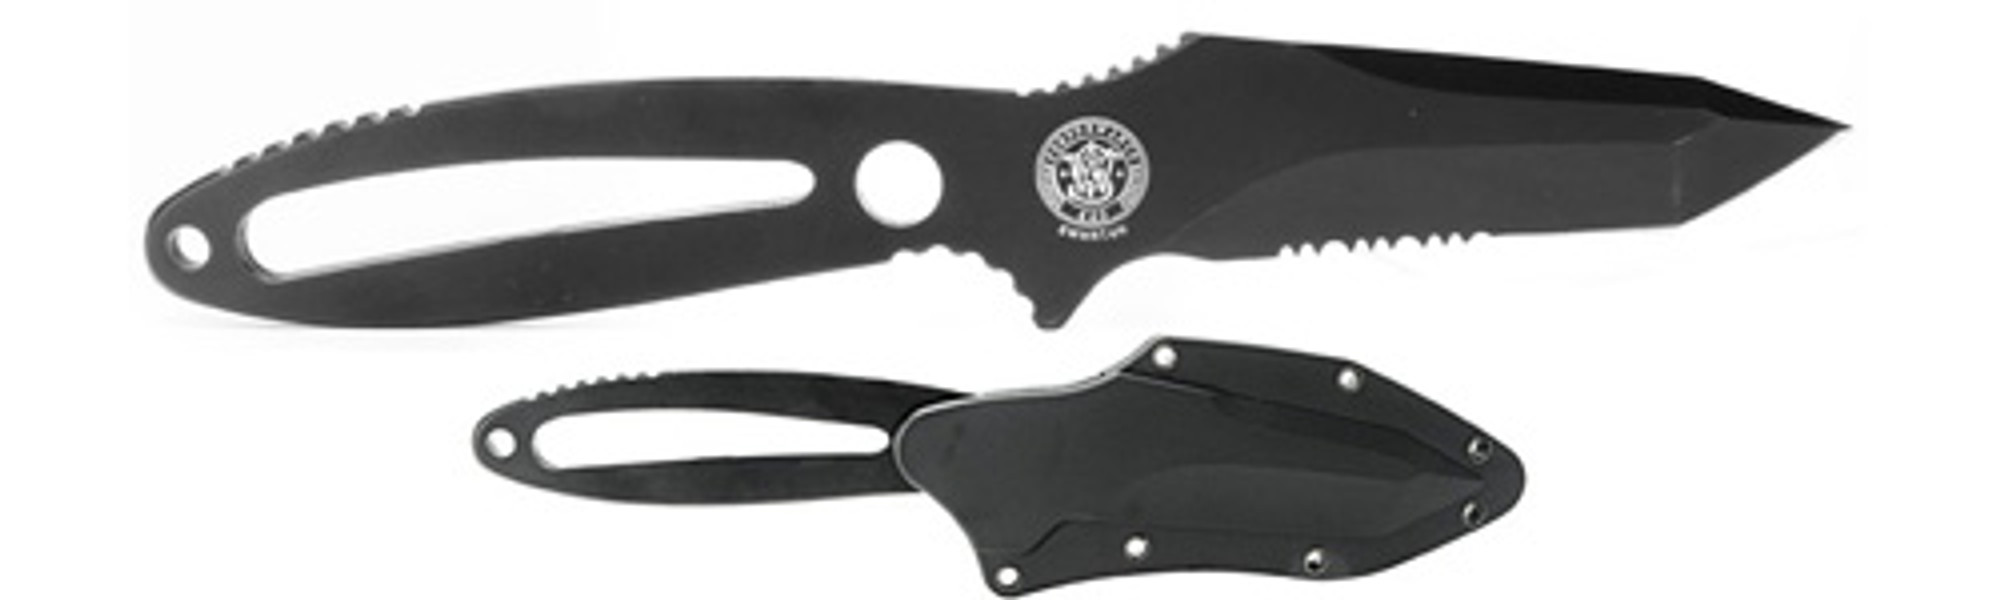 Smith & Wesson H.R.T. Serrated Knife - Black